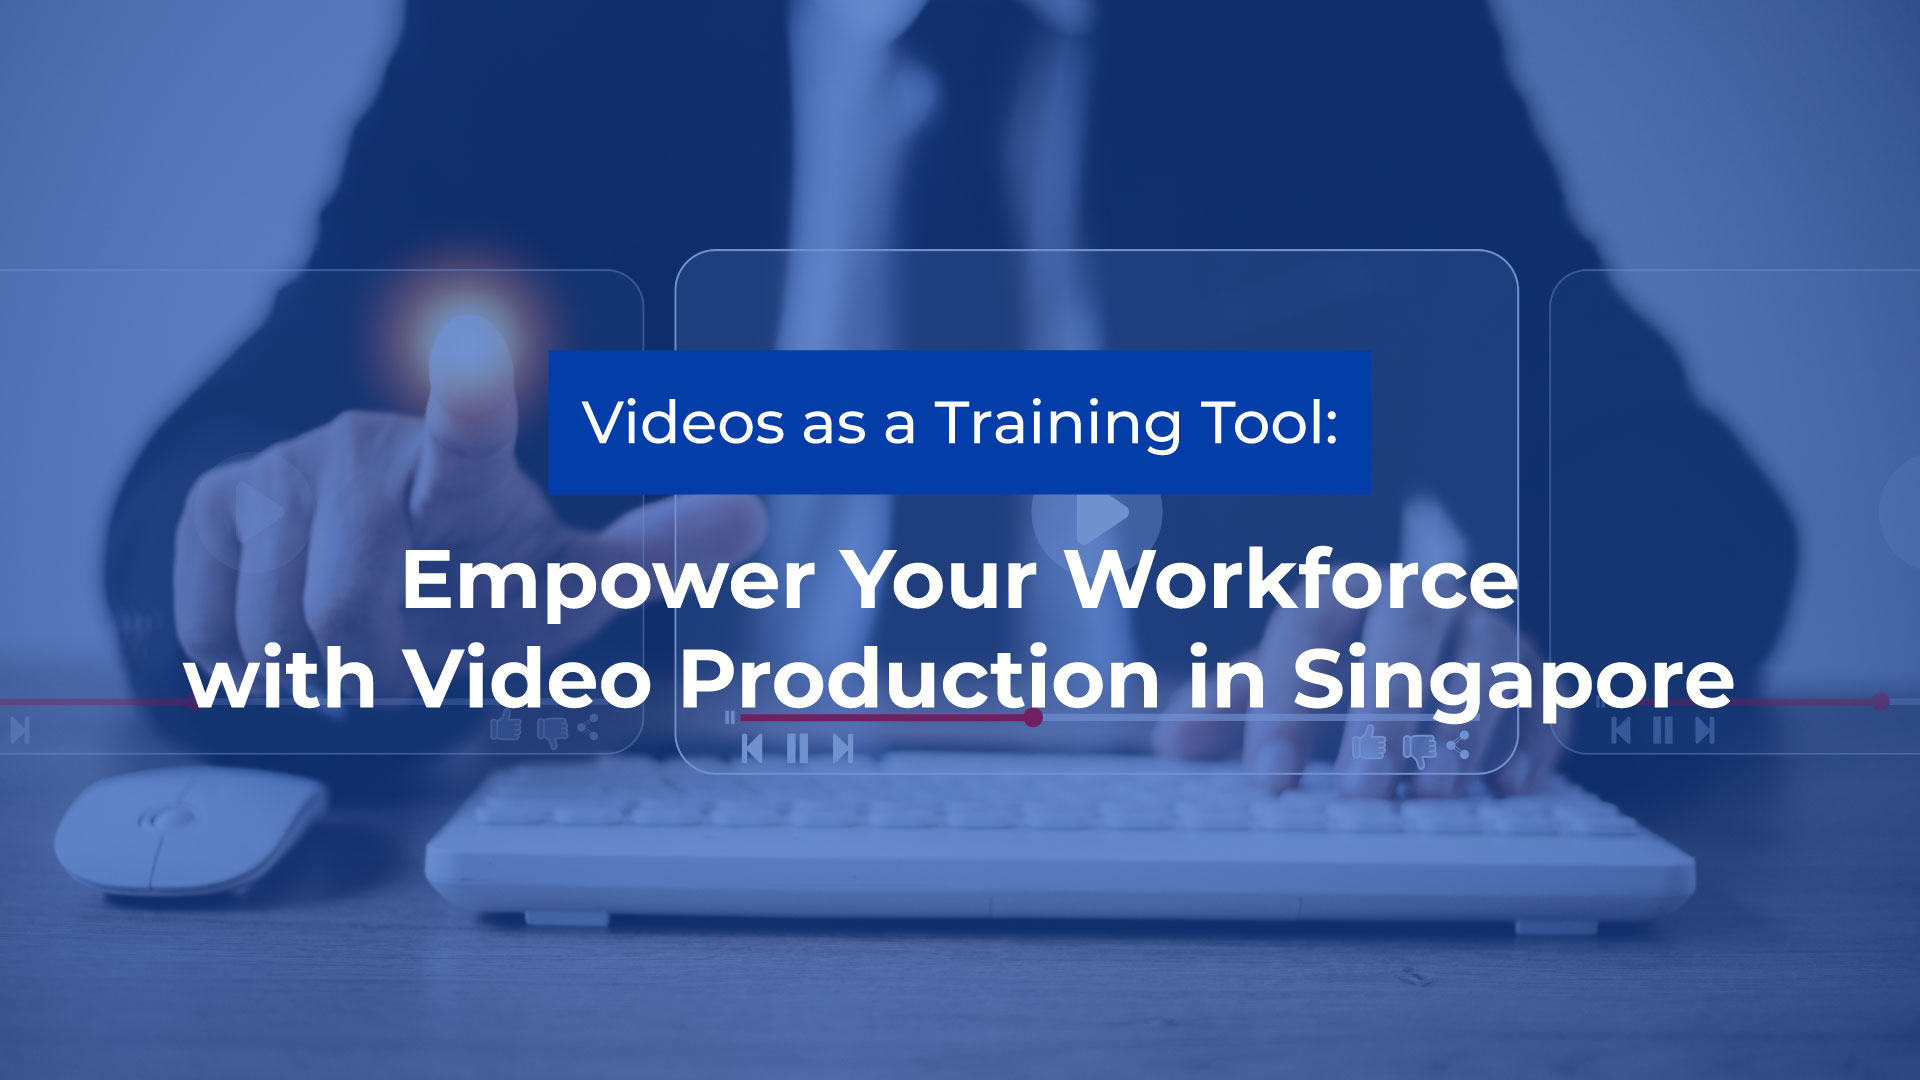 Videos as training tool empower your workforce with Video Production in Singapore